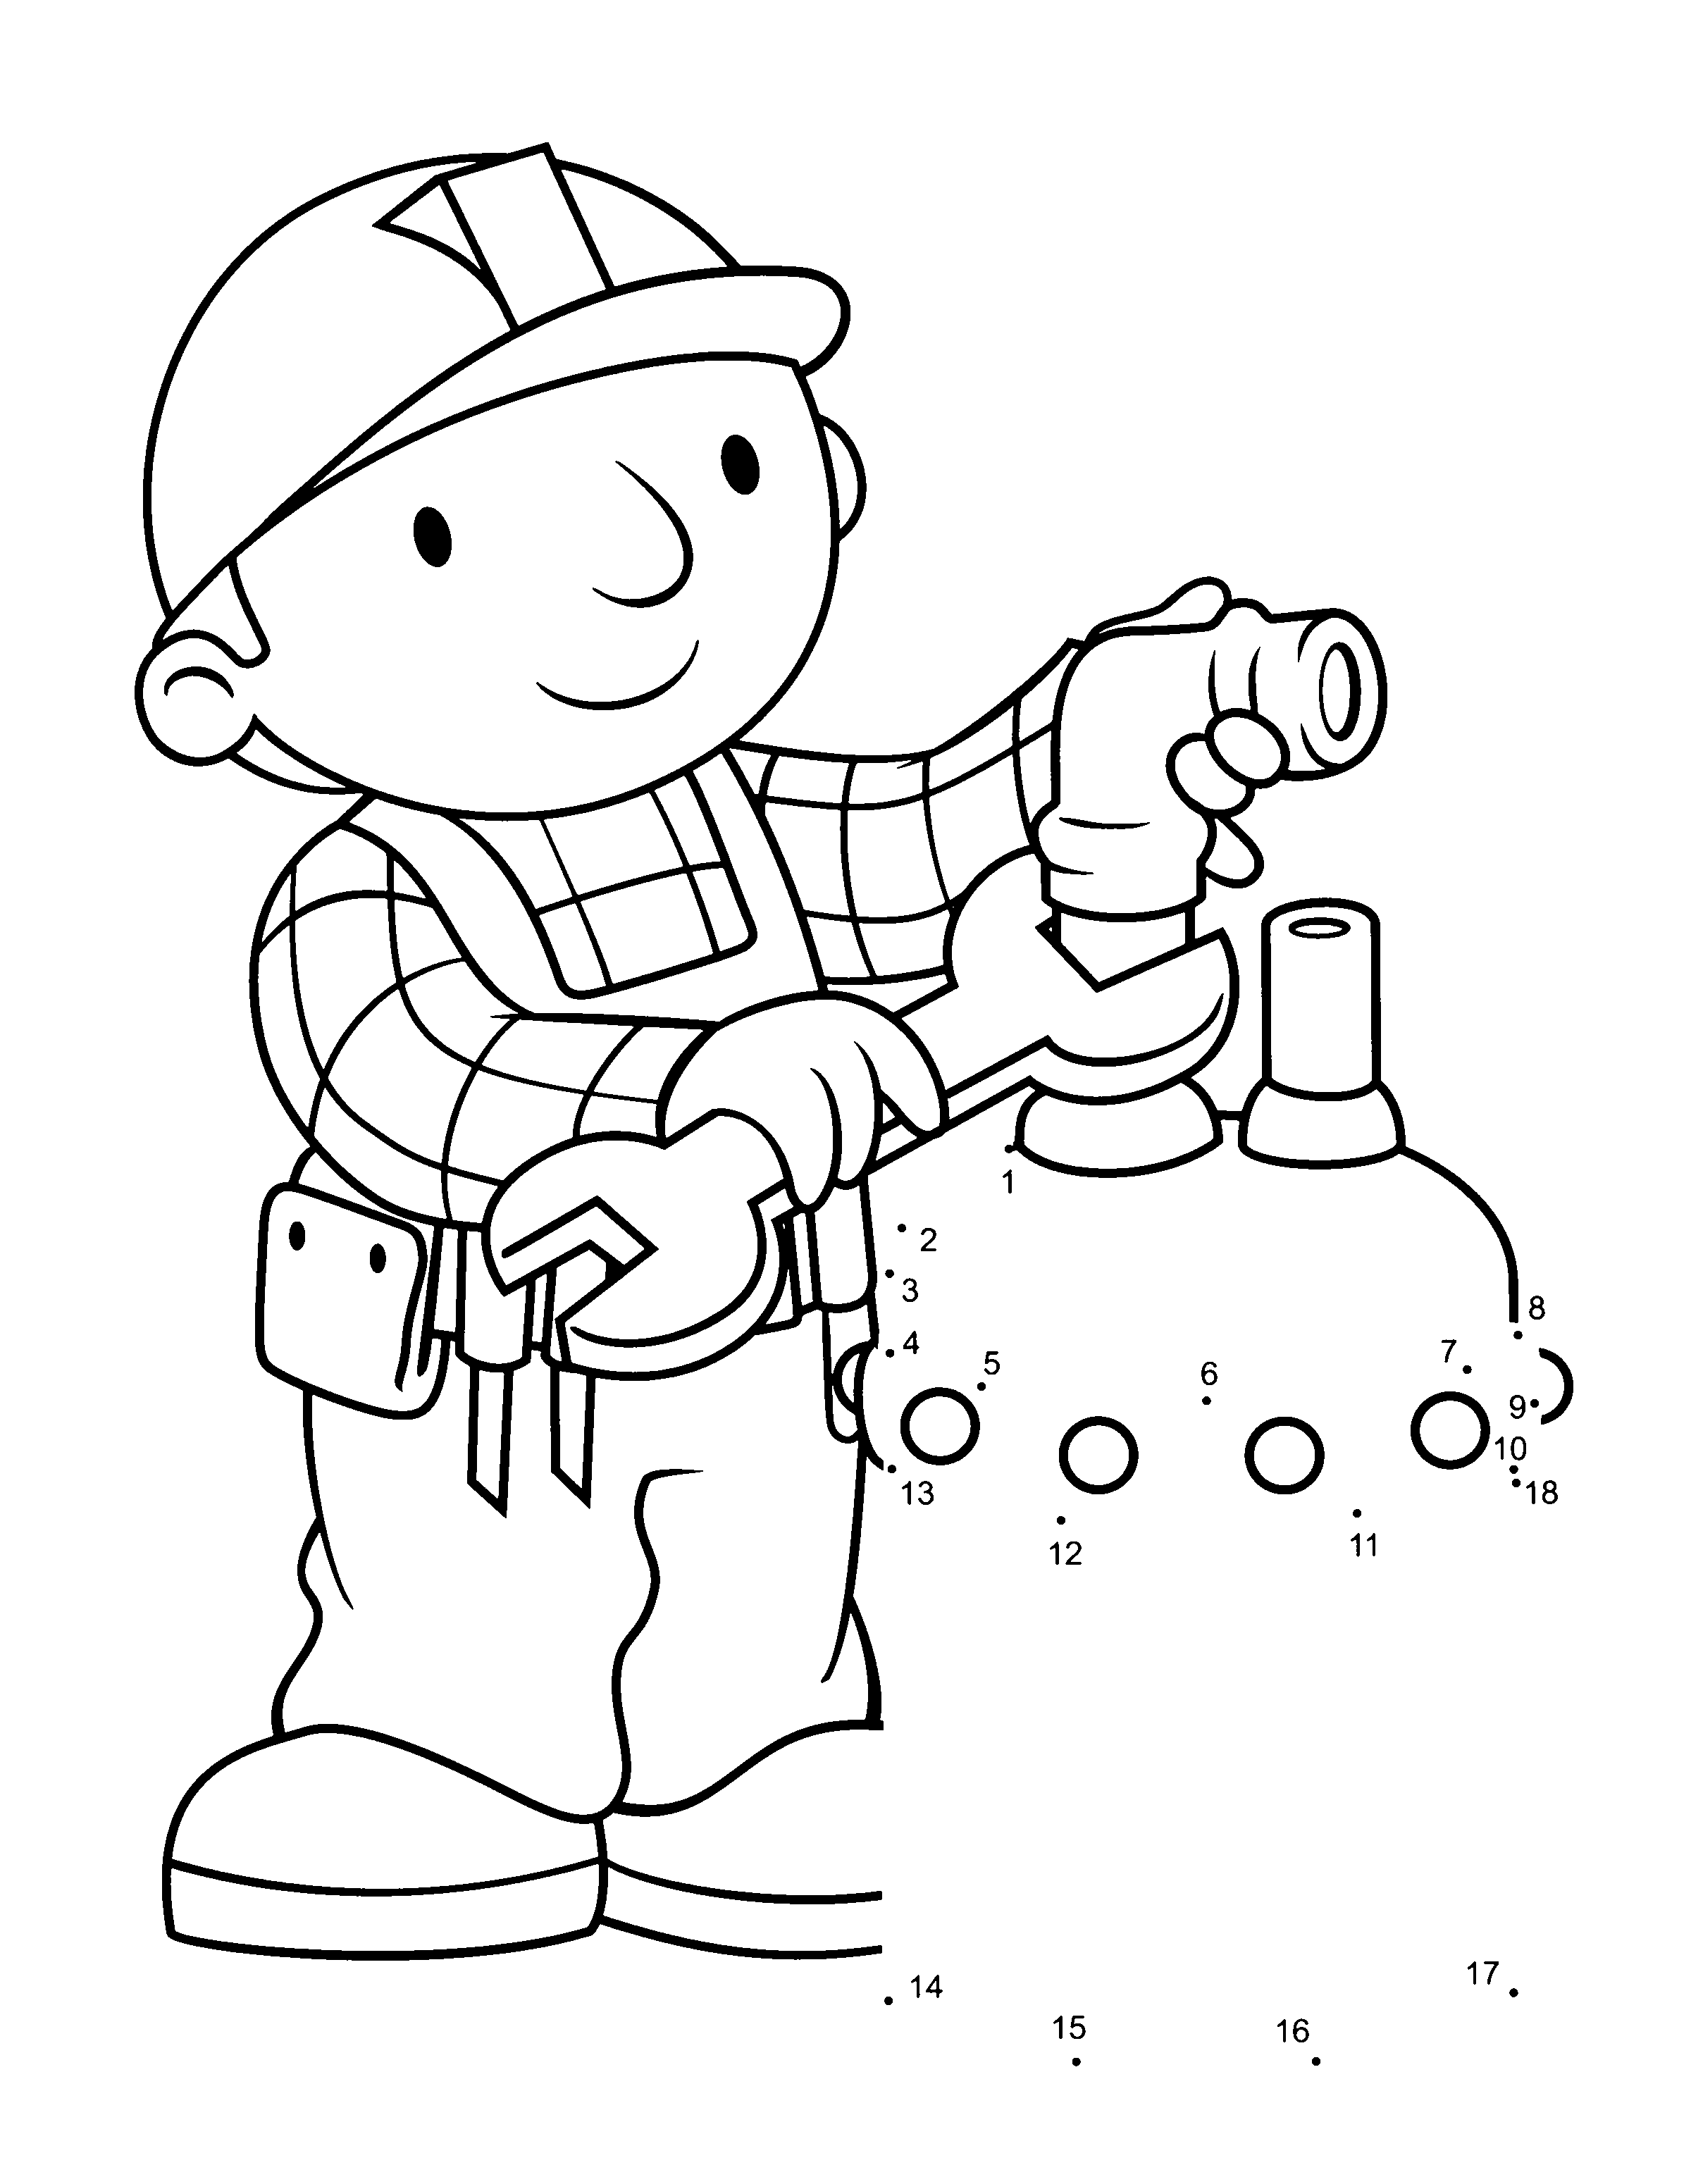 Bob Builder Coloring Pages Printable Dump Truck Muck - Get Coloring Pages